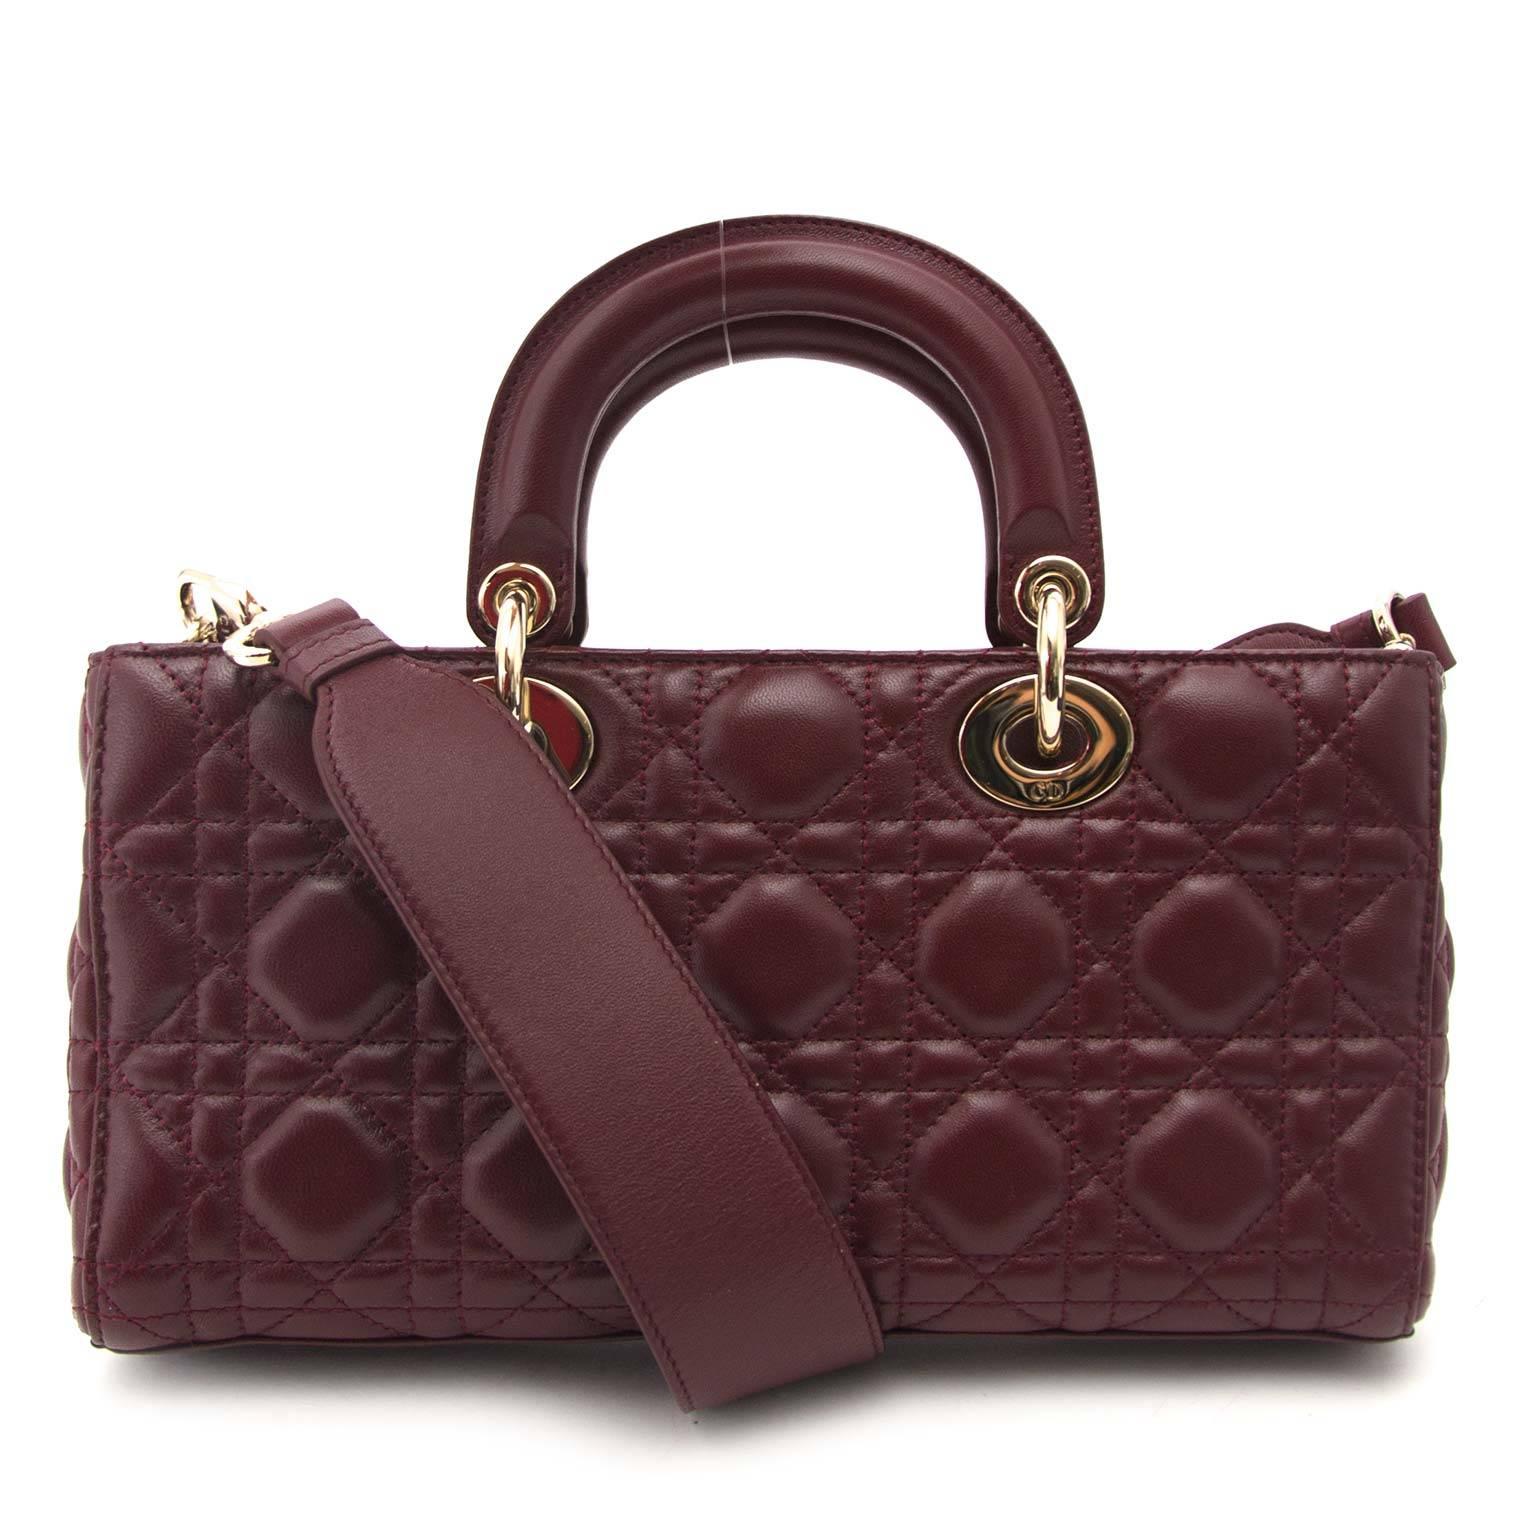 Excellent condition

Estimated retail price: €2,300

Dior Bordeaux Lambskin Runway Bag

This amazing Dior runway bag is made out of the finest leahter.
The gold details are a perfect match with the bordeaux color.
The typical Dior letters give a